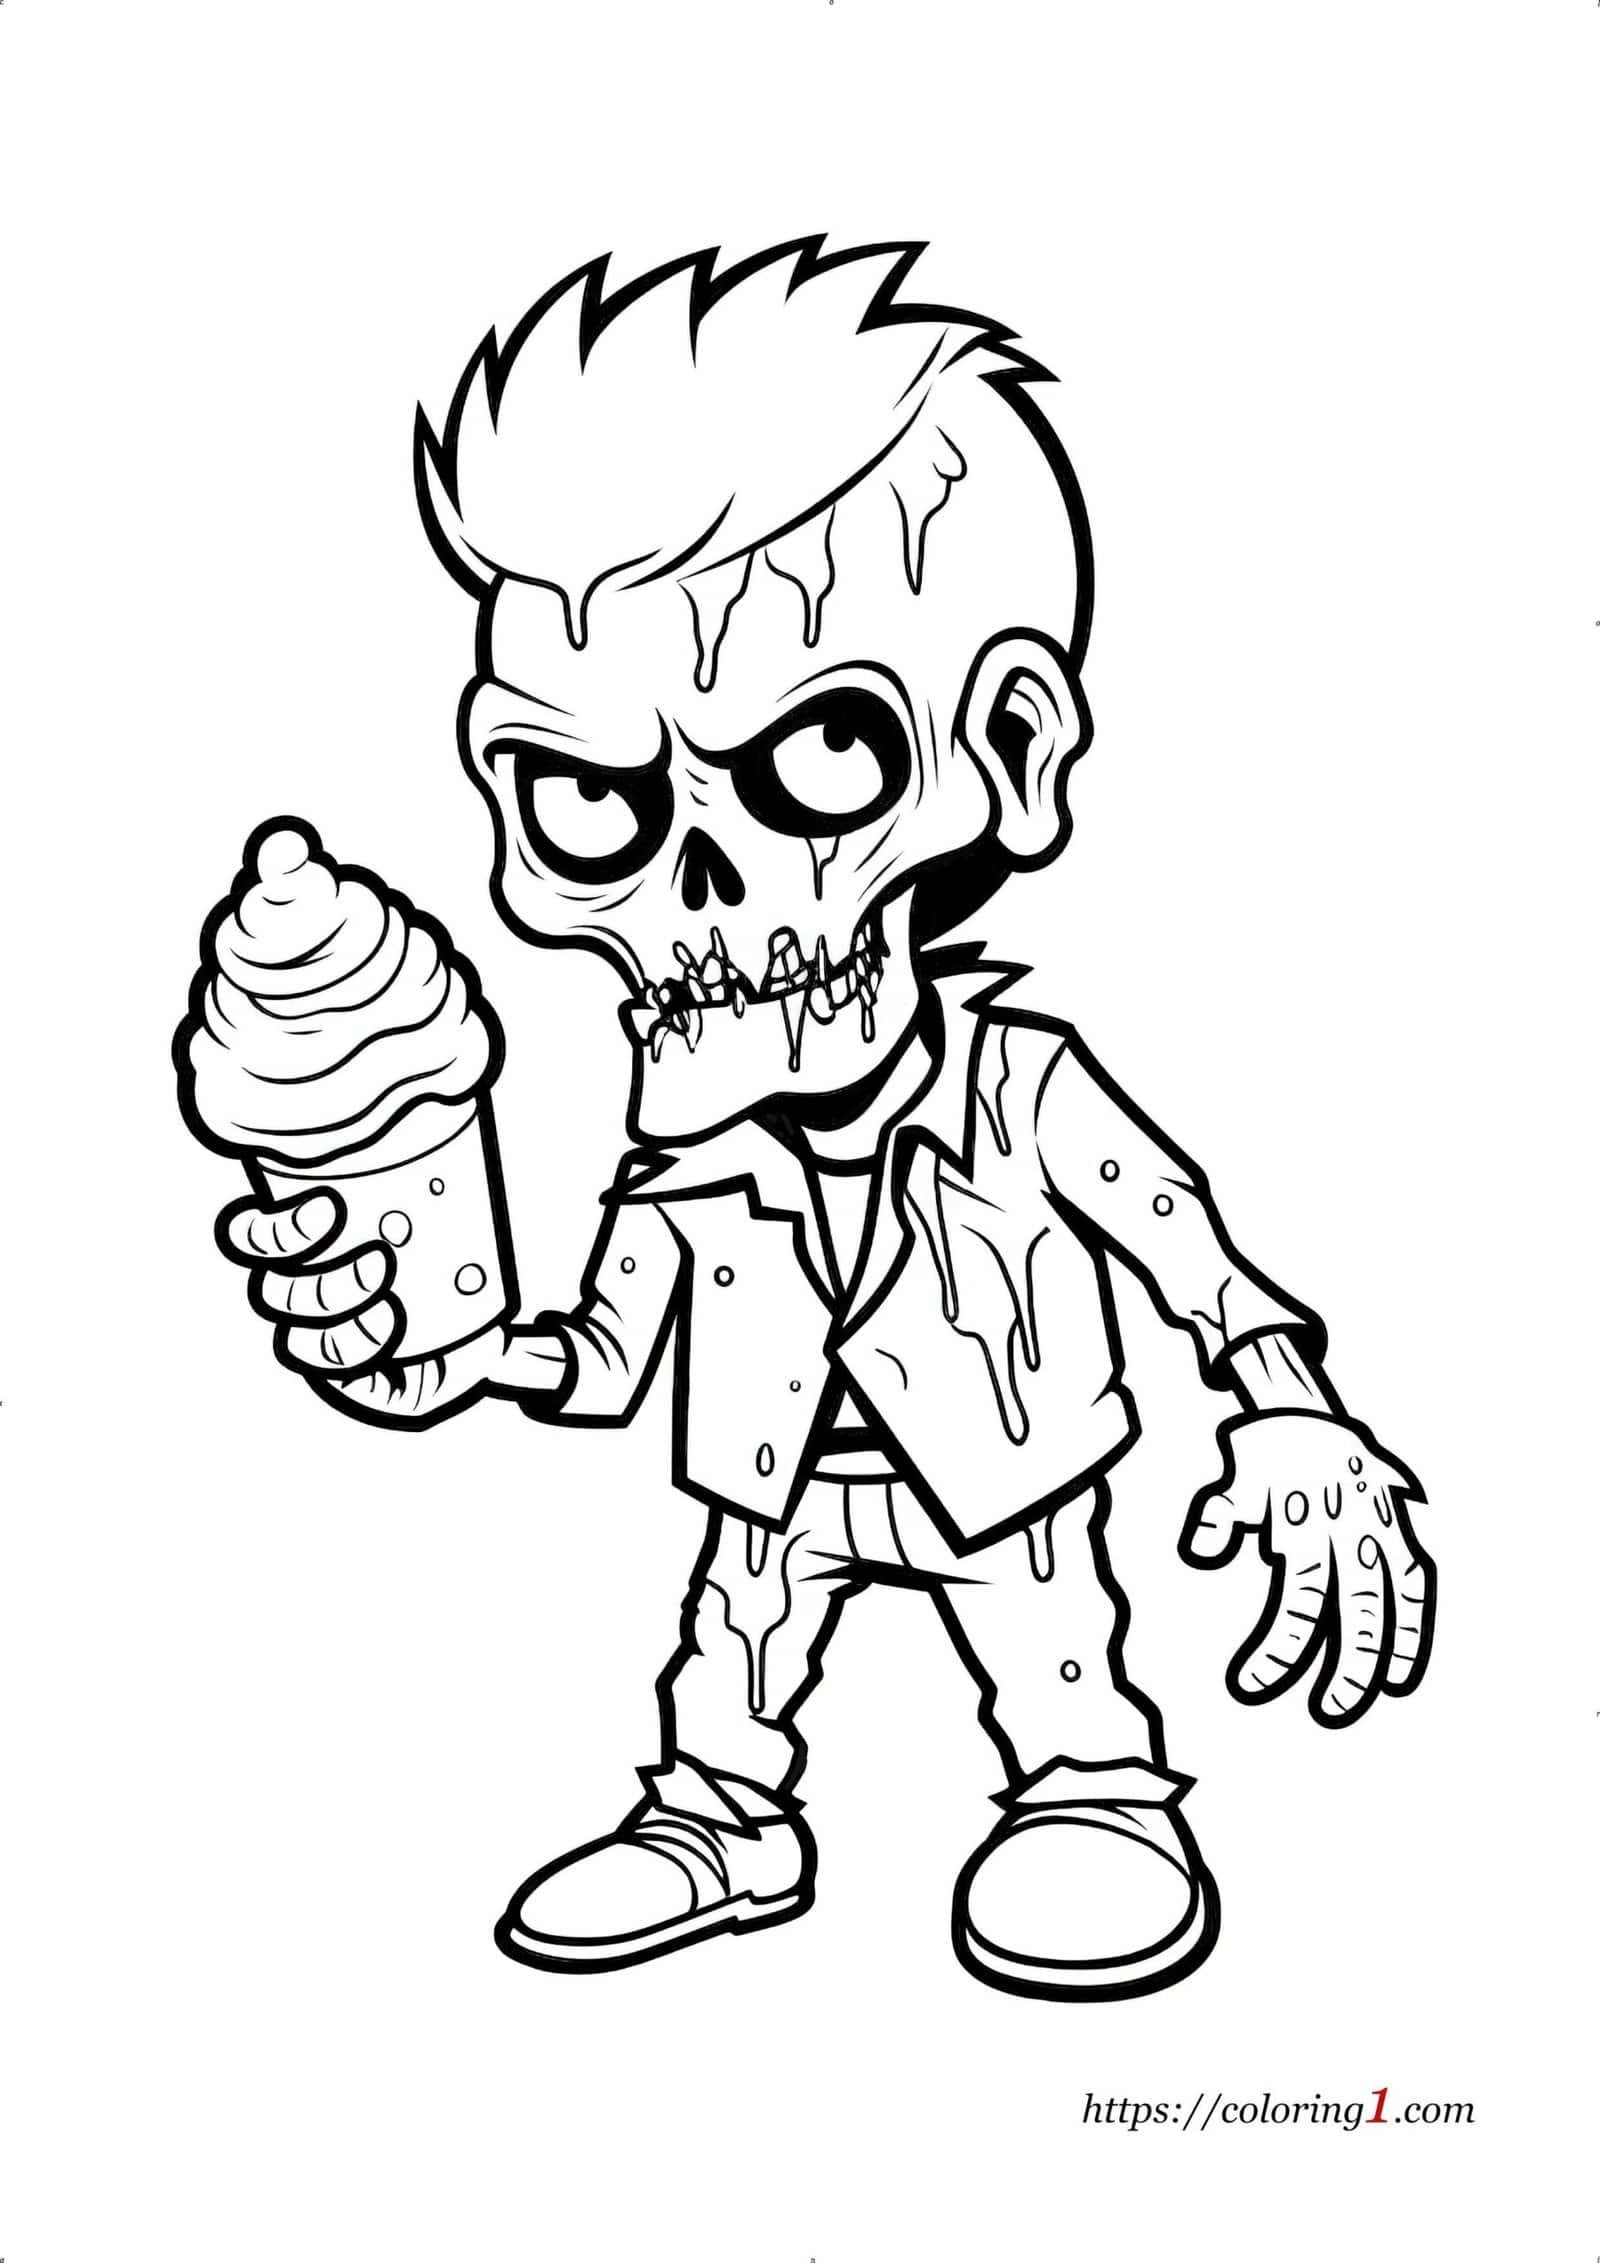 Zombie Eats Ice Cream coloring page for kids